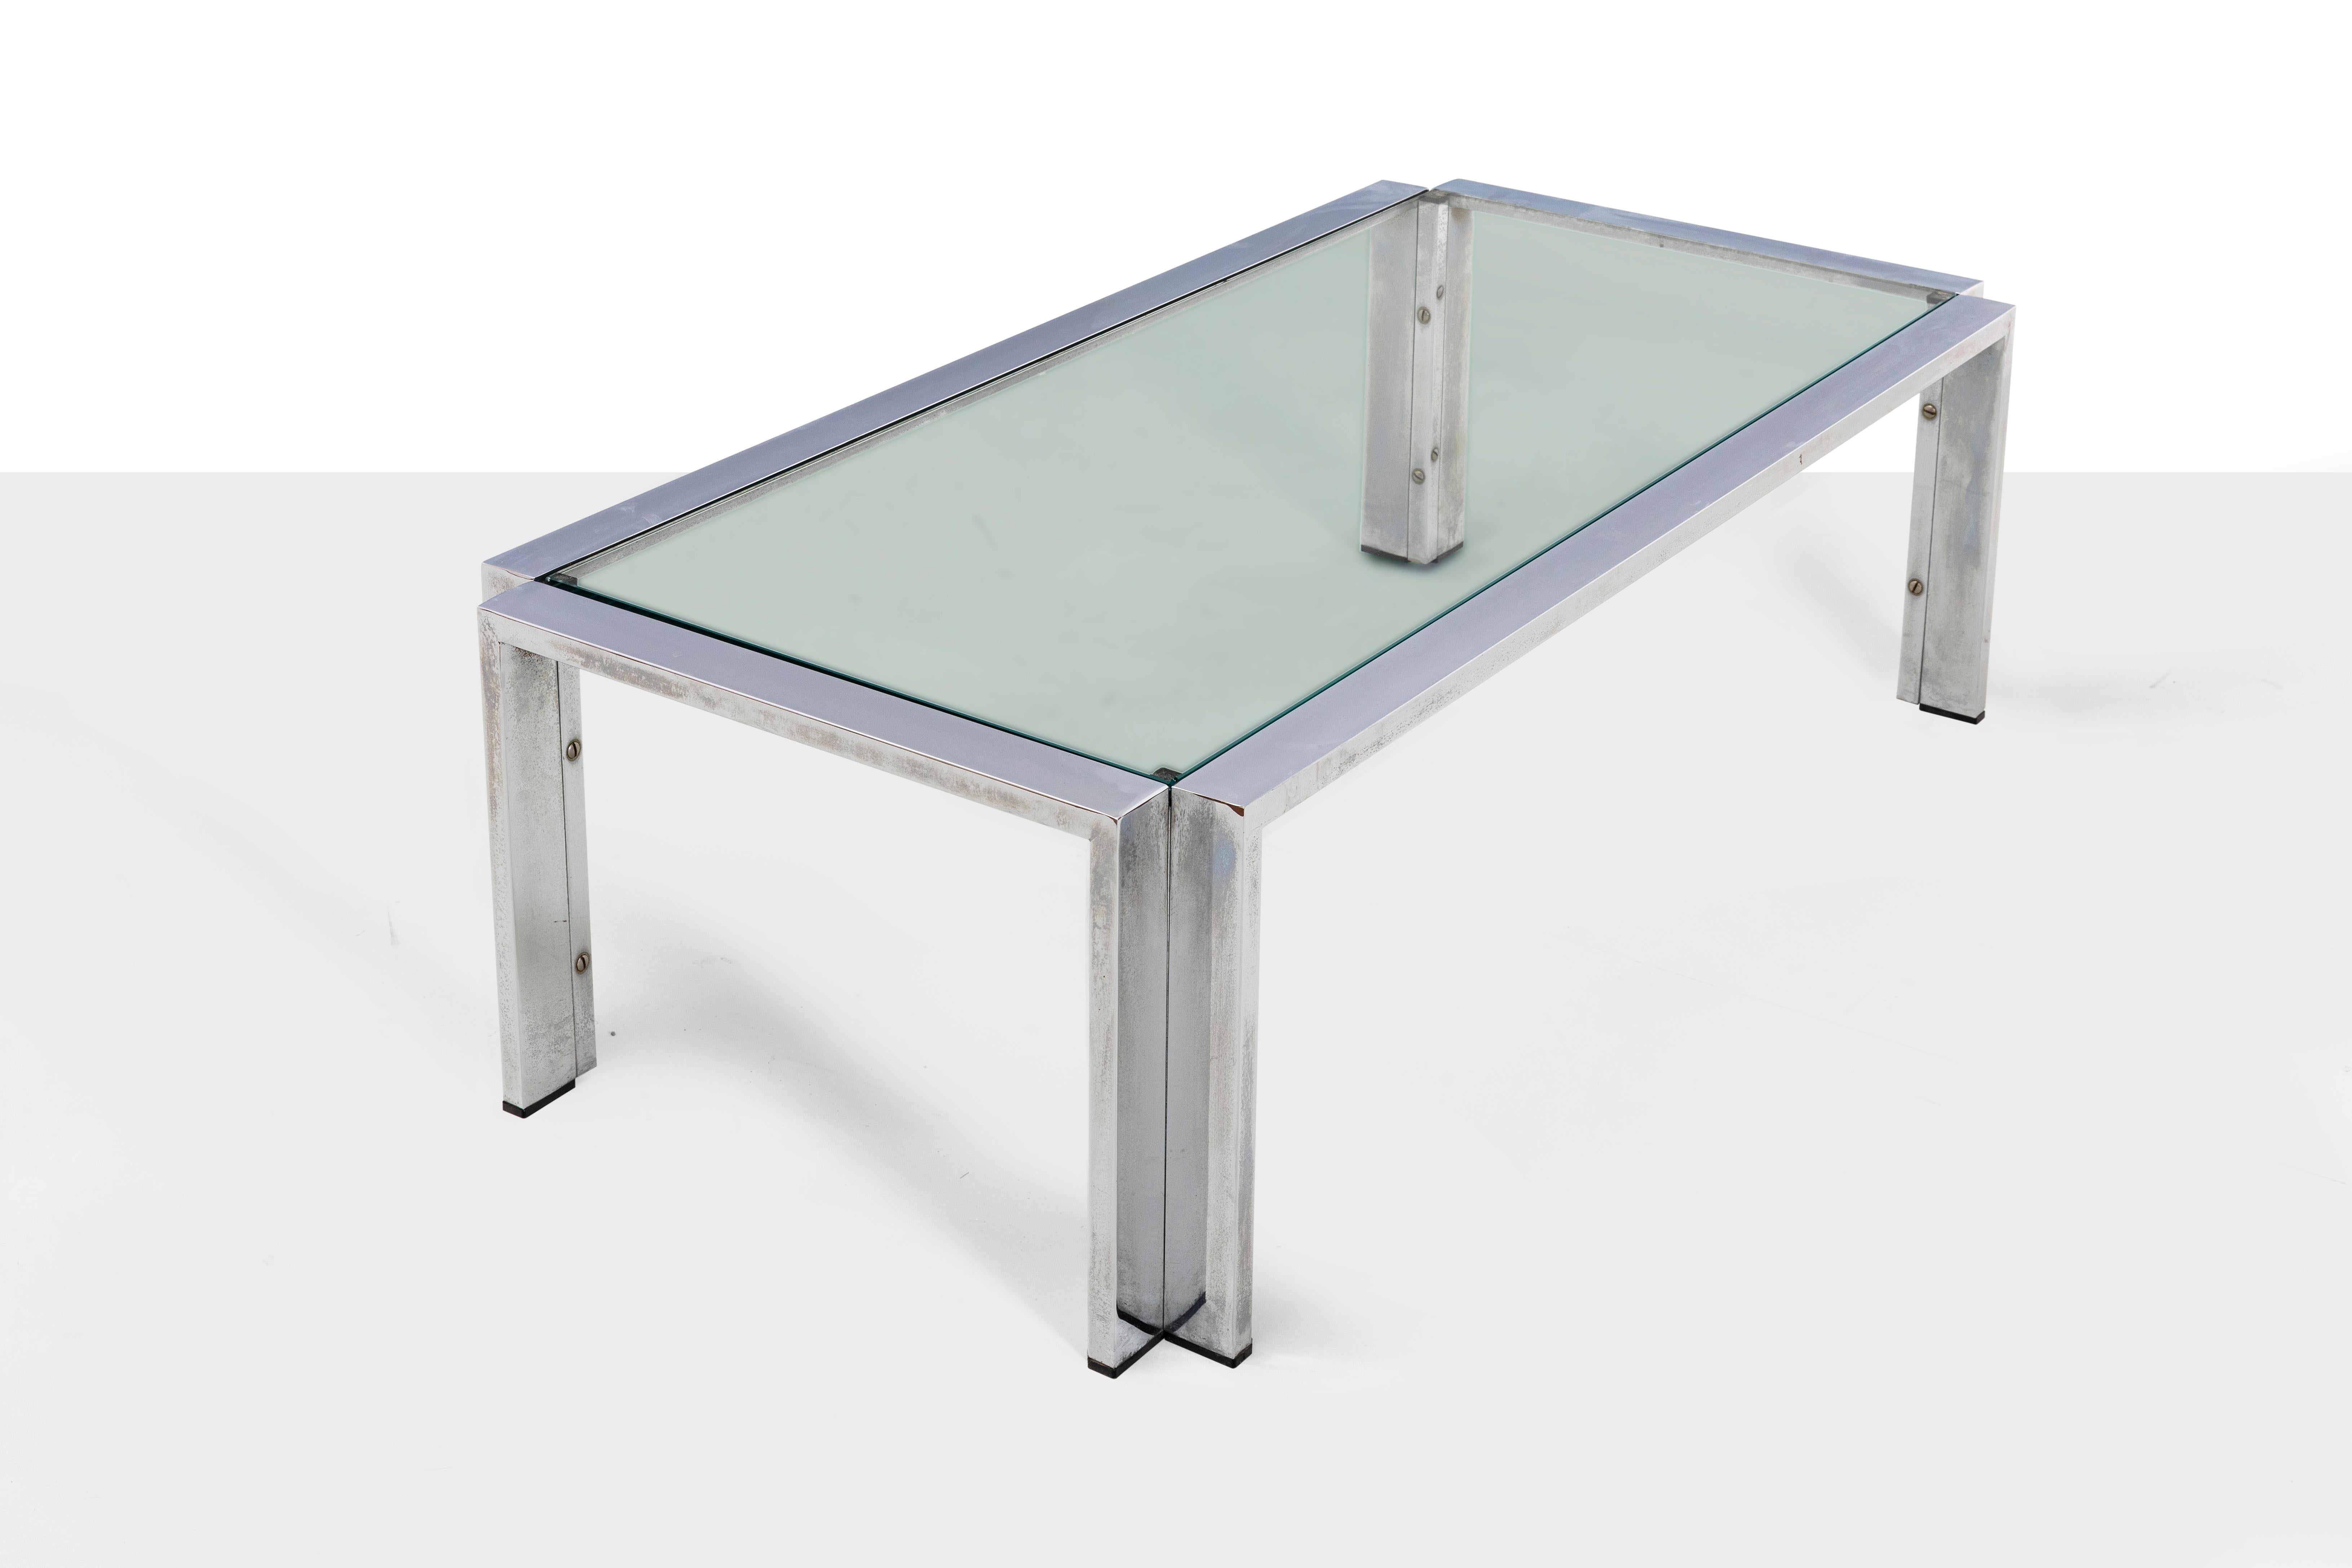 Italian Romeo Rega Prod. Italy, C. 1970 Glass Table with Steel Frame and Edges For Sale